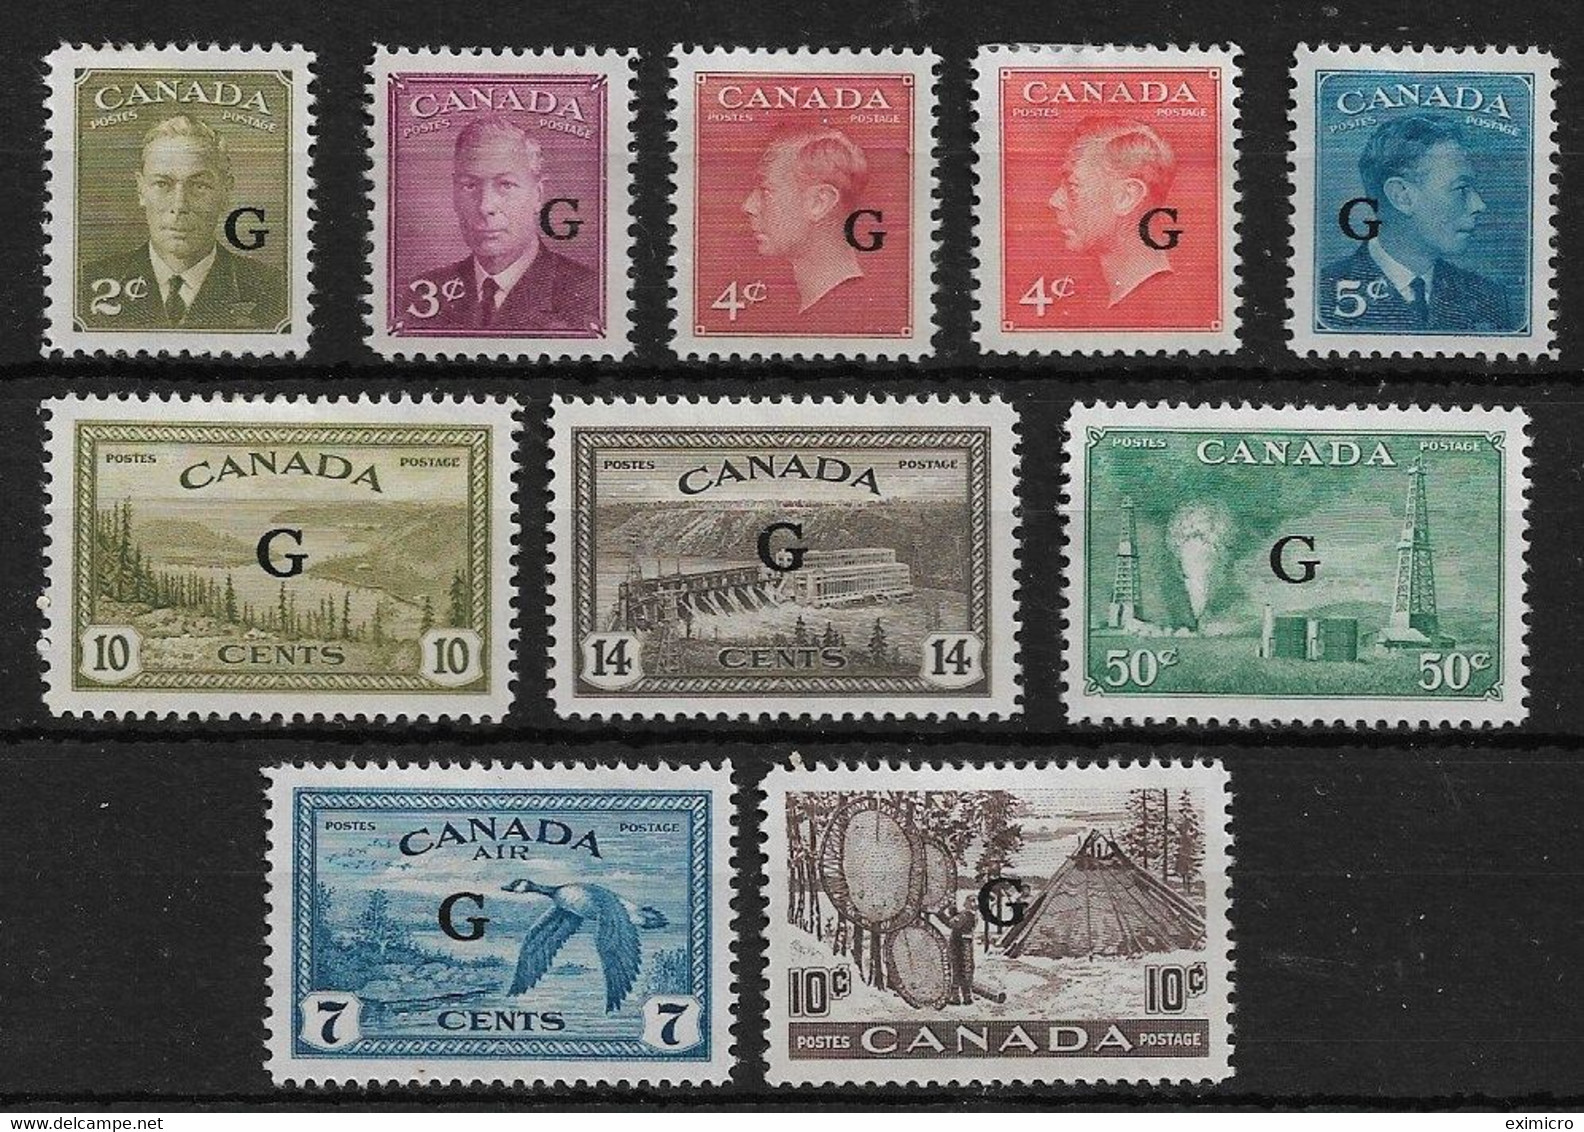 CANADA 1950 - 1952 'G' OVERPRINT OFFICIALS BETWEEN SG O180 And SG O191 MOUNTED MINT Cat £97 - Overprinted